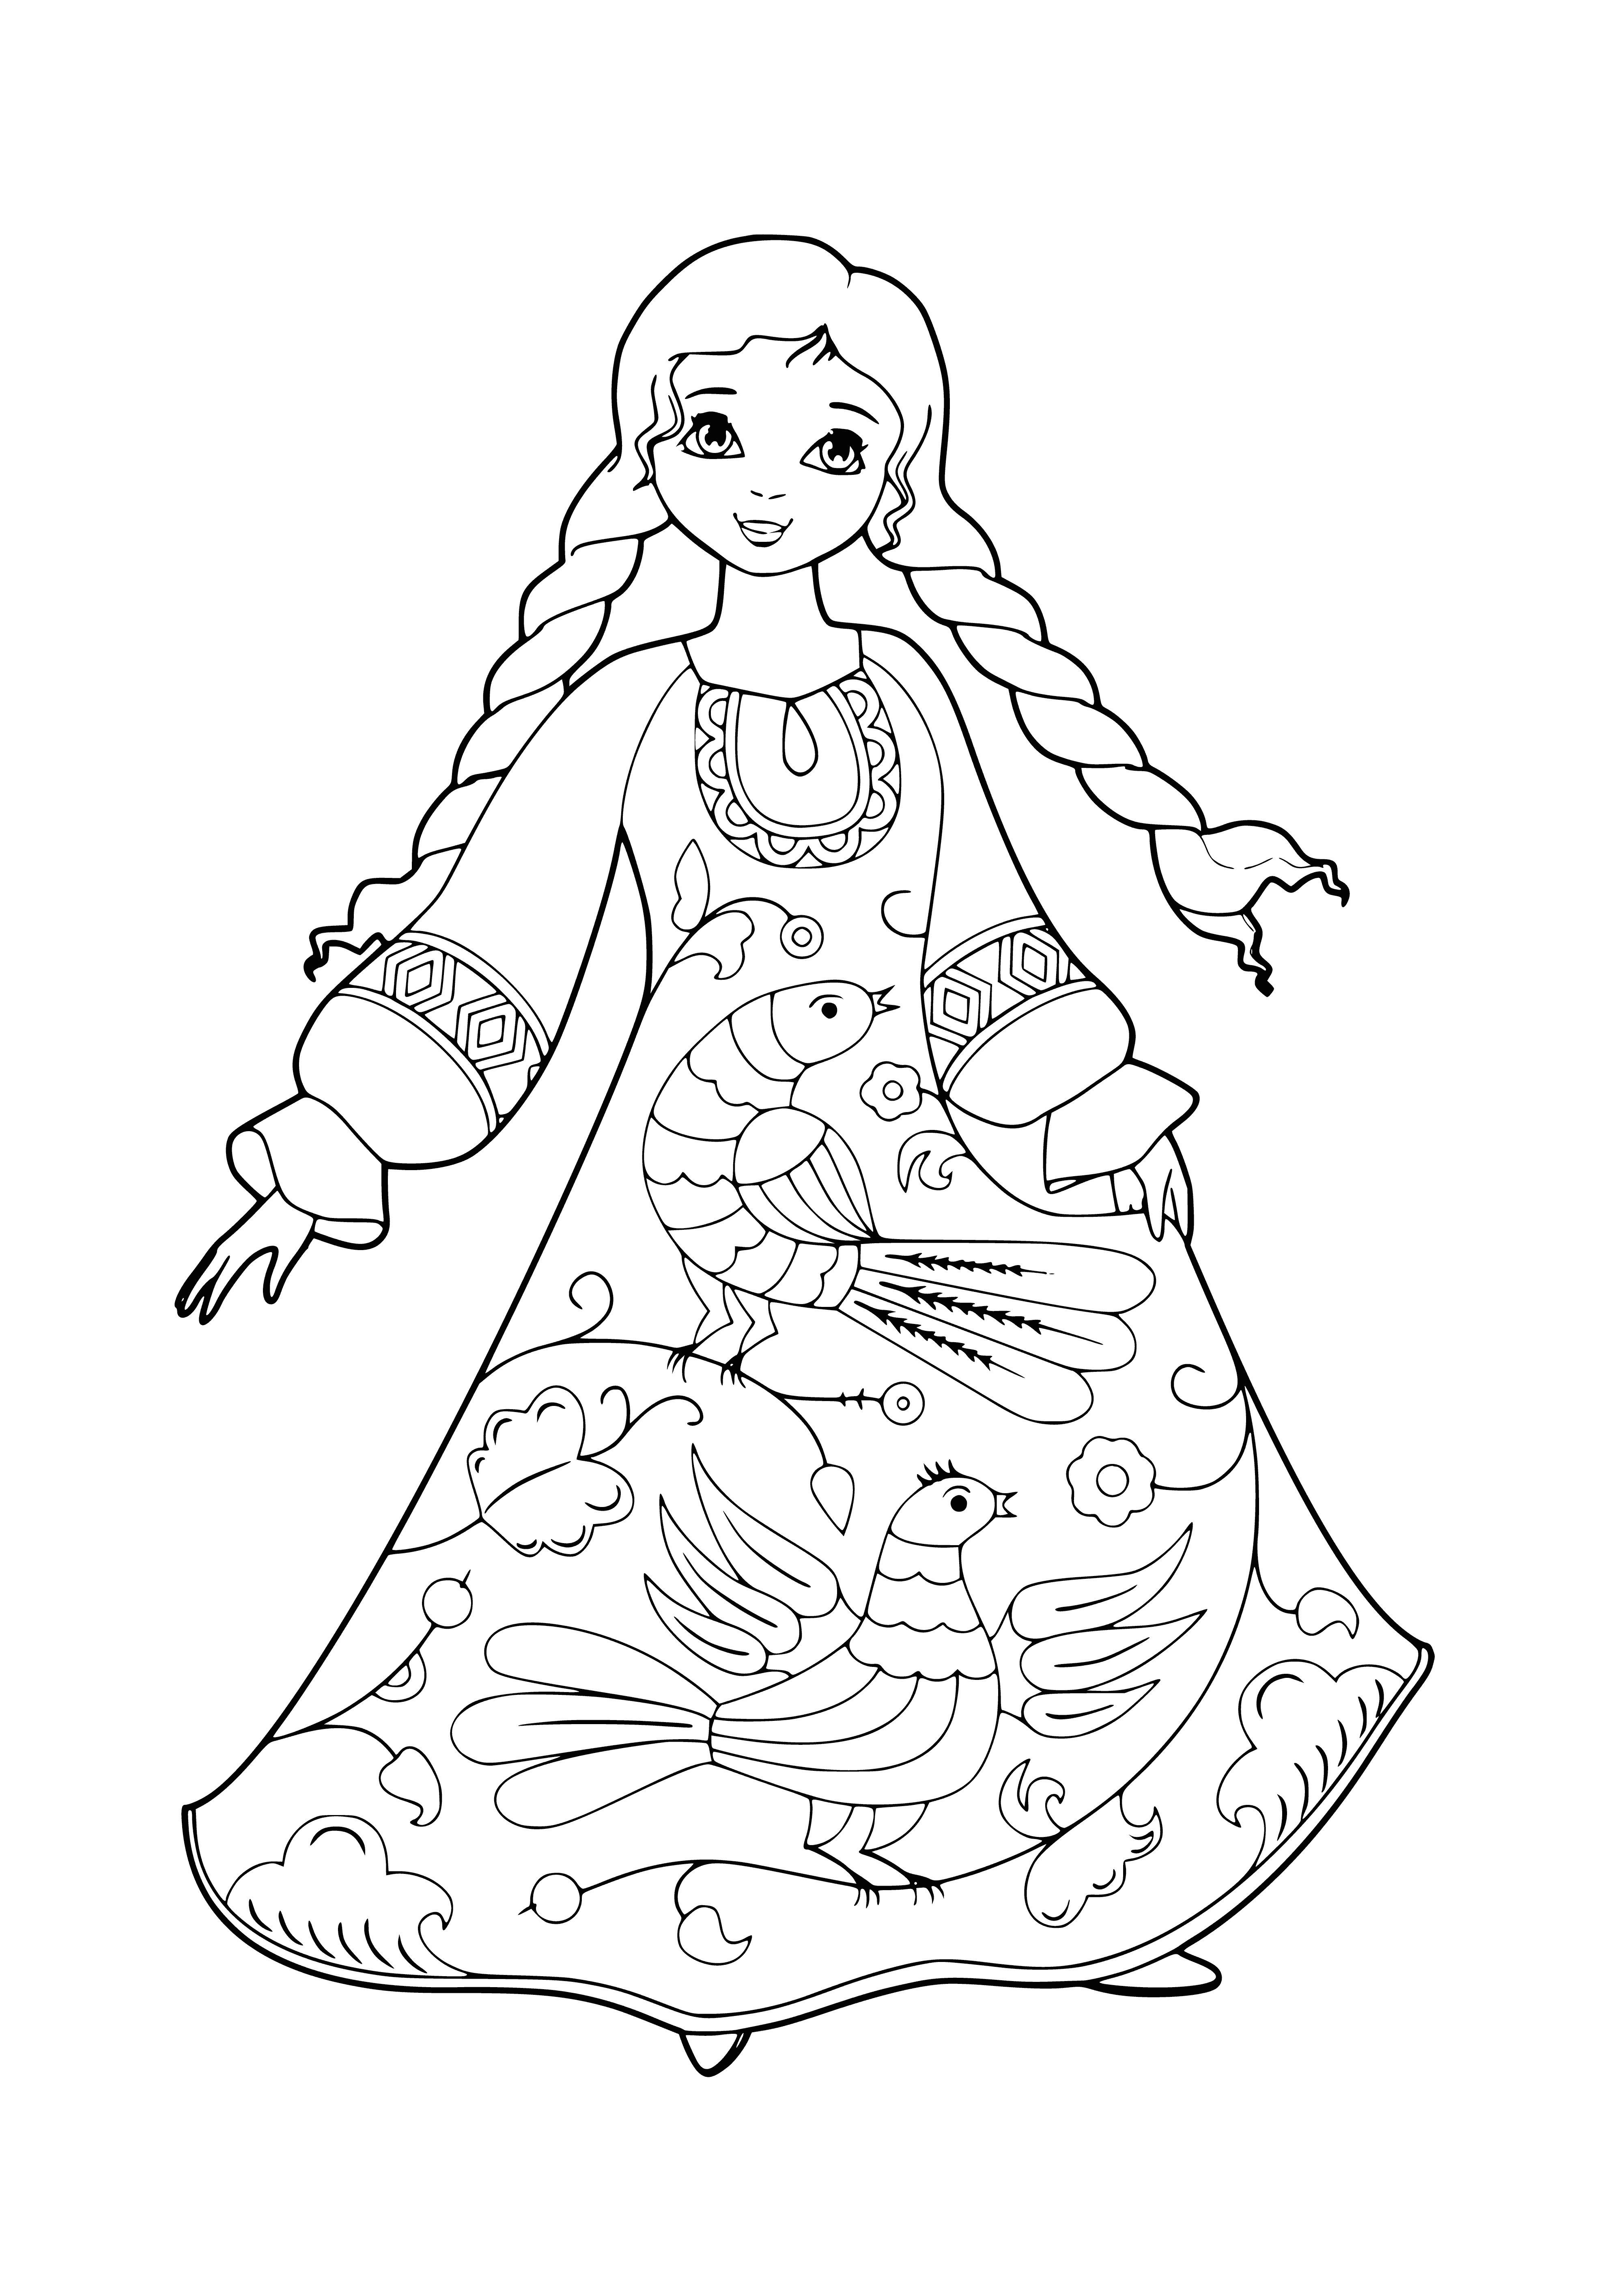 coloring page: Woman wearing patterned dress poses against dark background; arms out, head tilted, eyes closed.